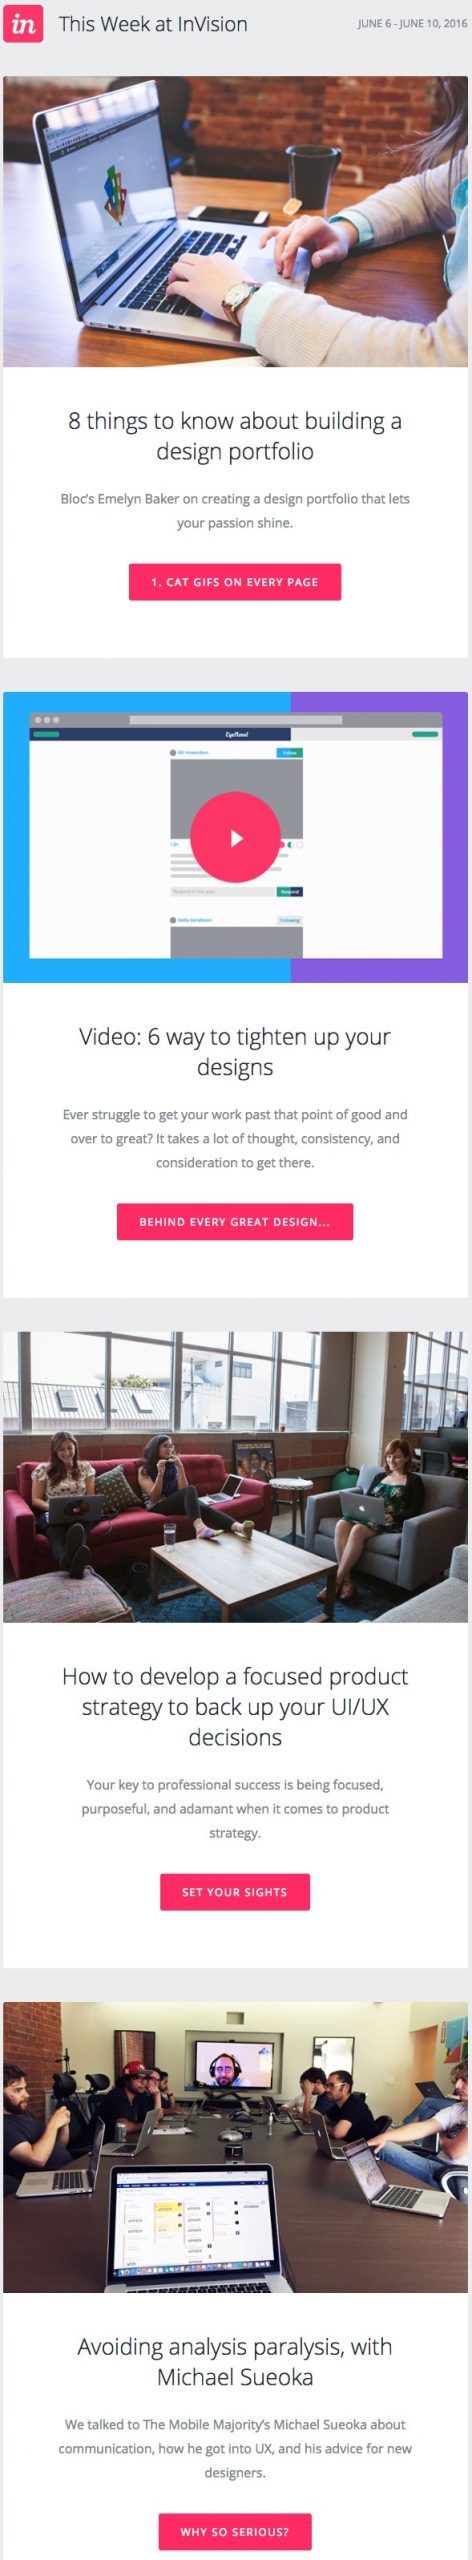 Email newsletter example design with blog posts by InVision